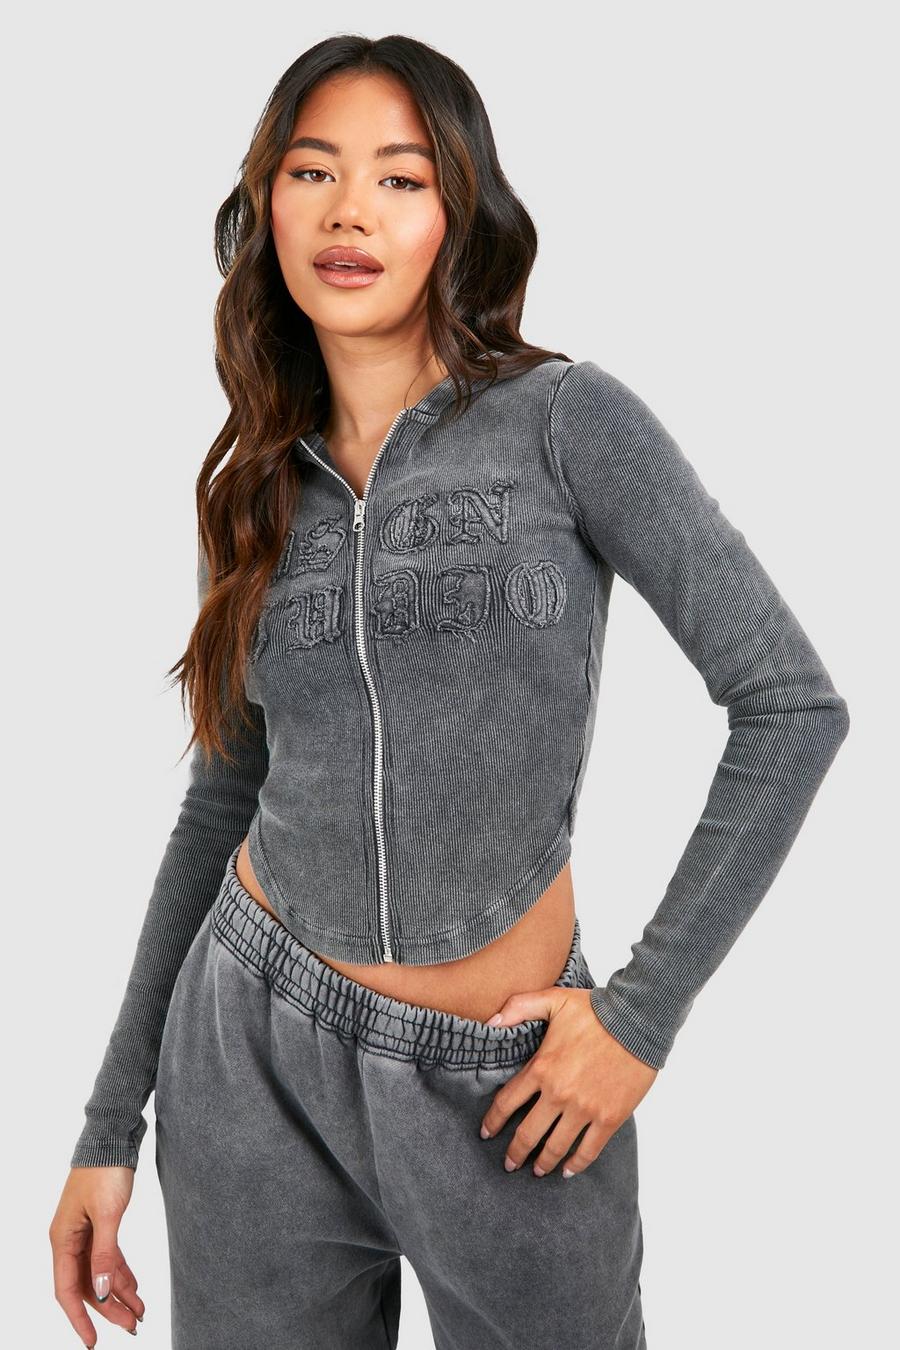 Charcoal Dsgn Studio Self Fabric Applique Washed Ribbed Zip Hoodie image number 1